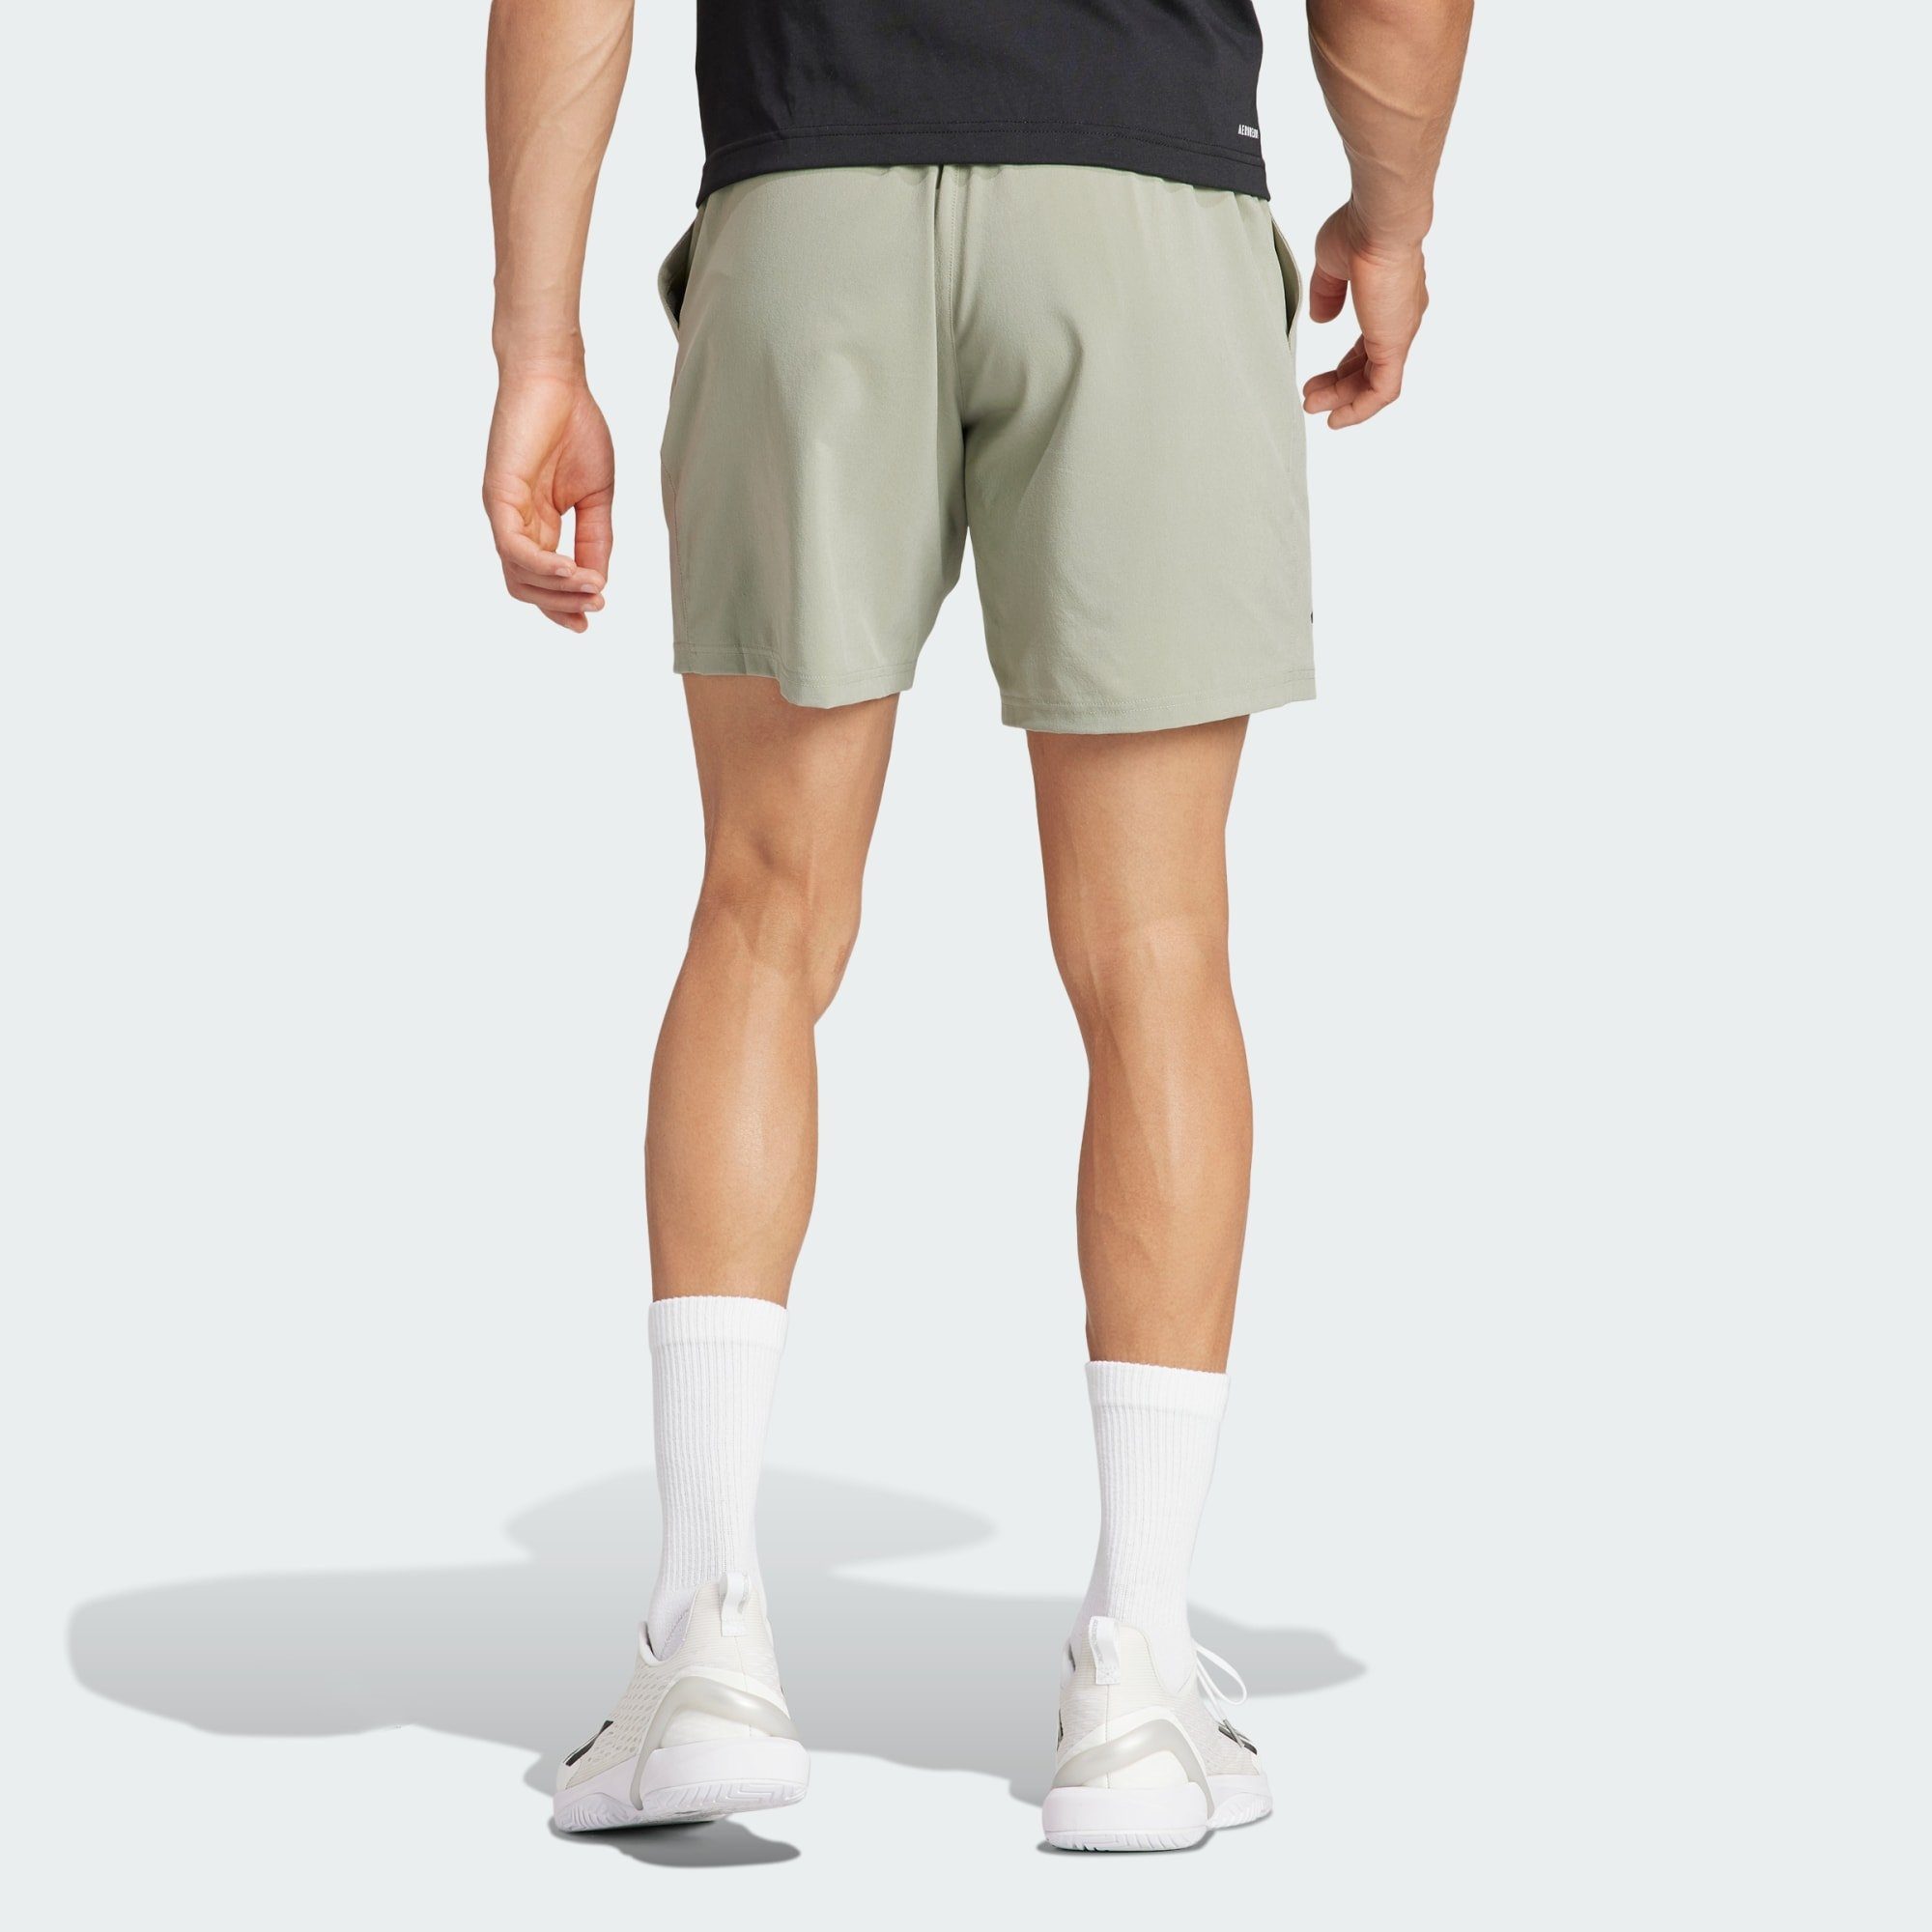 Silver STRETCH CLUB WOVEN Performance Pebble adidas SHORTS Funktionsshorts TENNIS